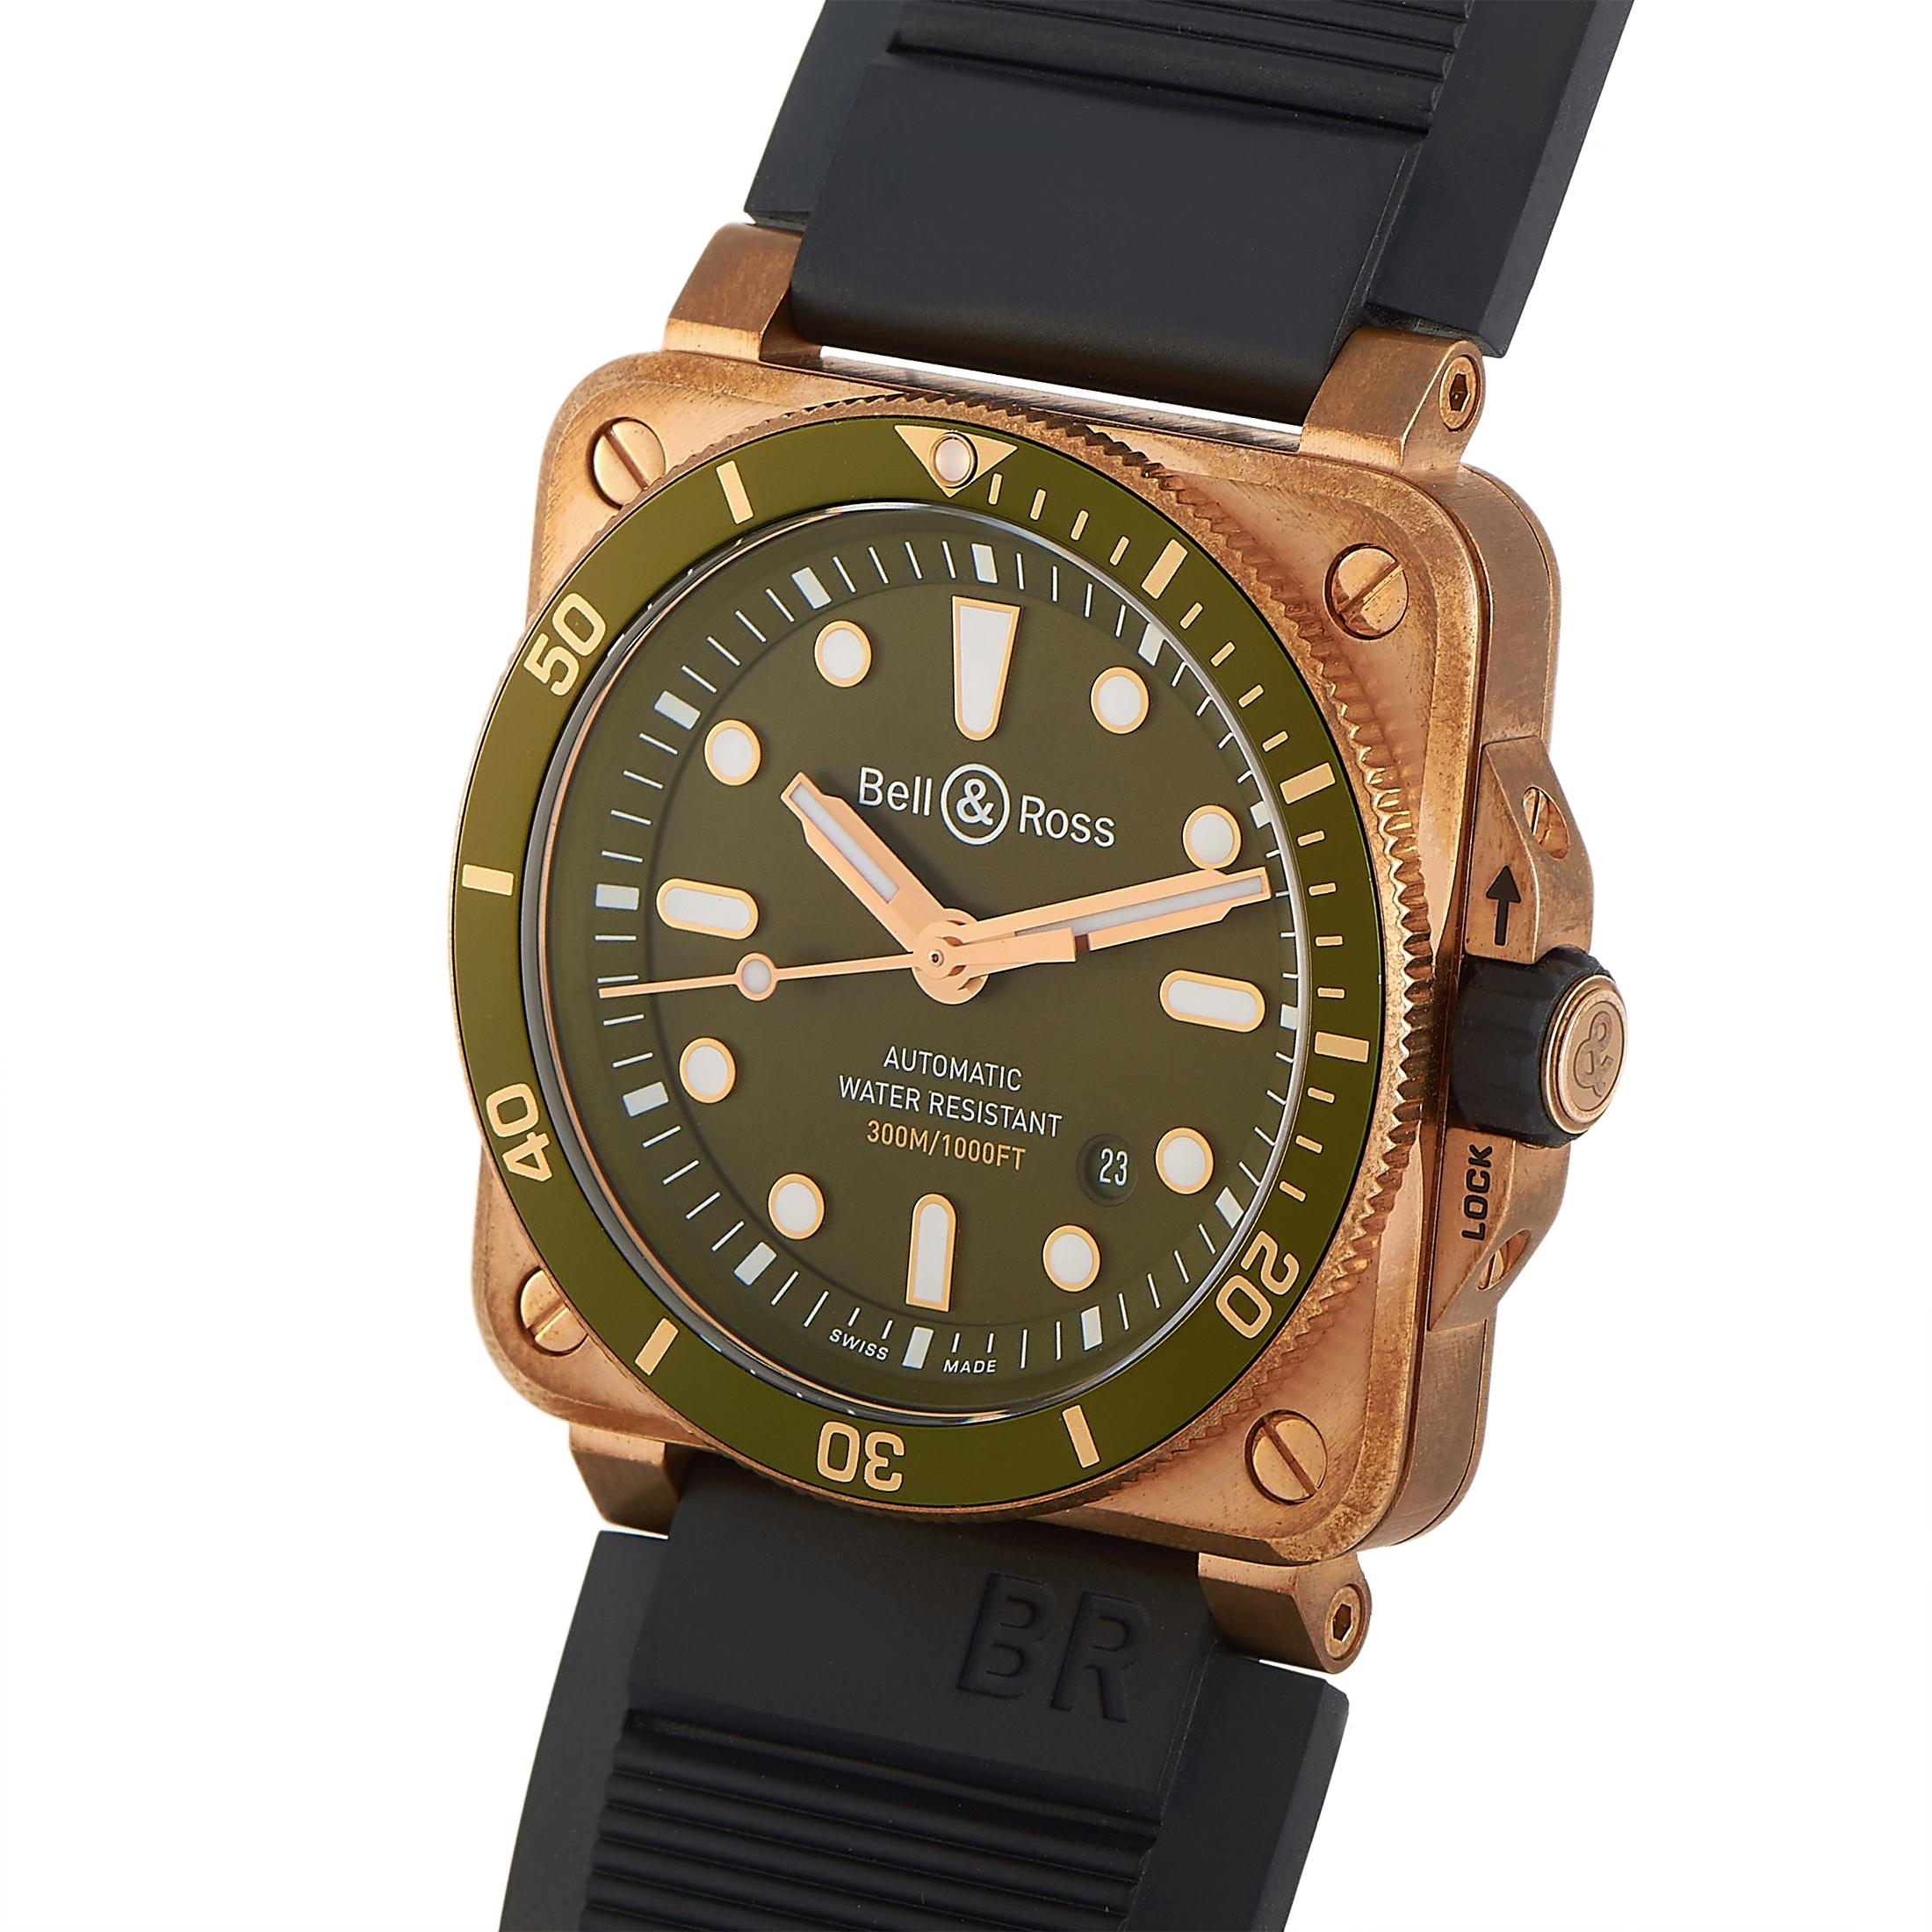 This is the Bell & Ross BR 03-92 Diver Green Bronze watch that is presented in an edition limited to 999 pieces.
 
 It comes with a bronze case that measures 42 mm in diameter and boasts stainless steel back. The case is fitted with a